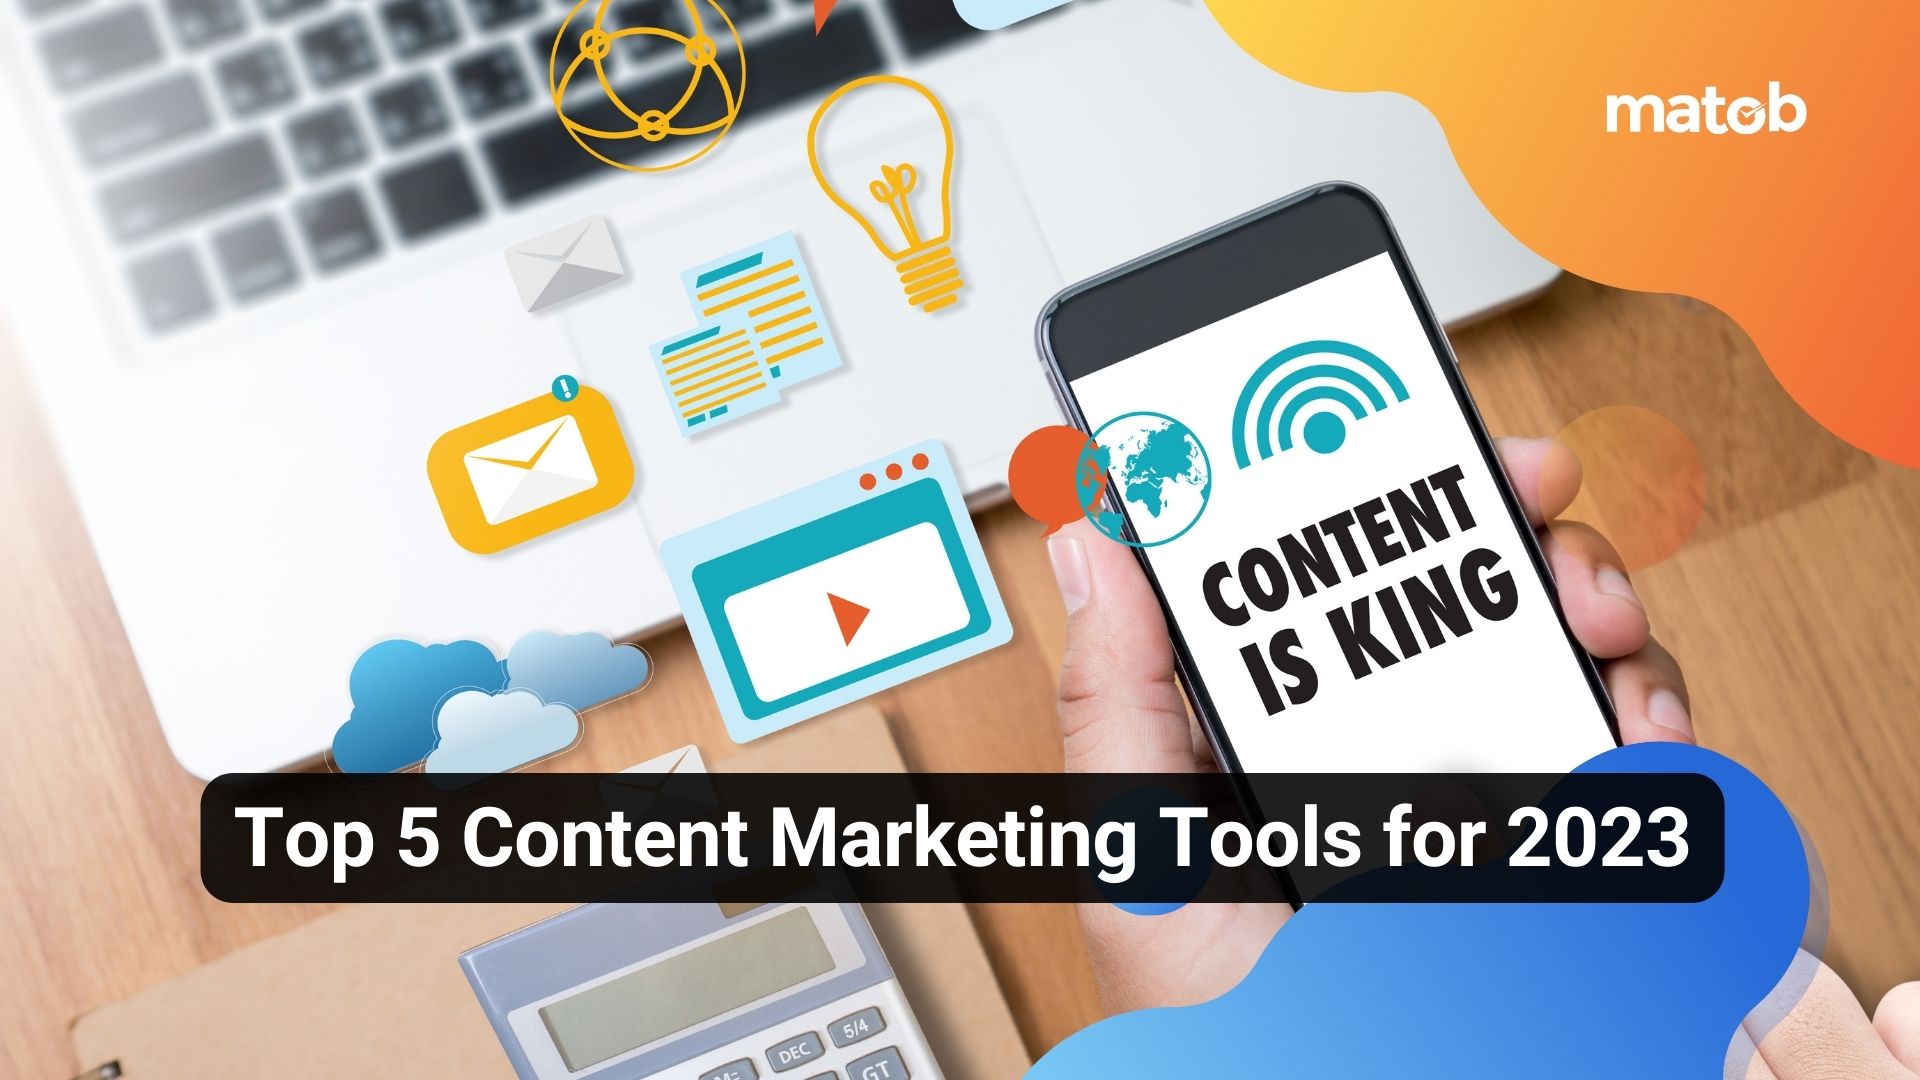 Top 5 Content Marketing Tools for 2023